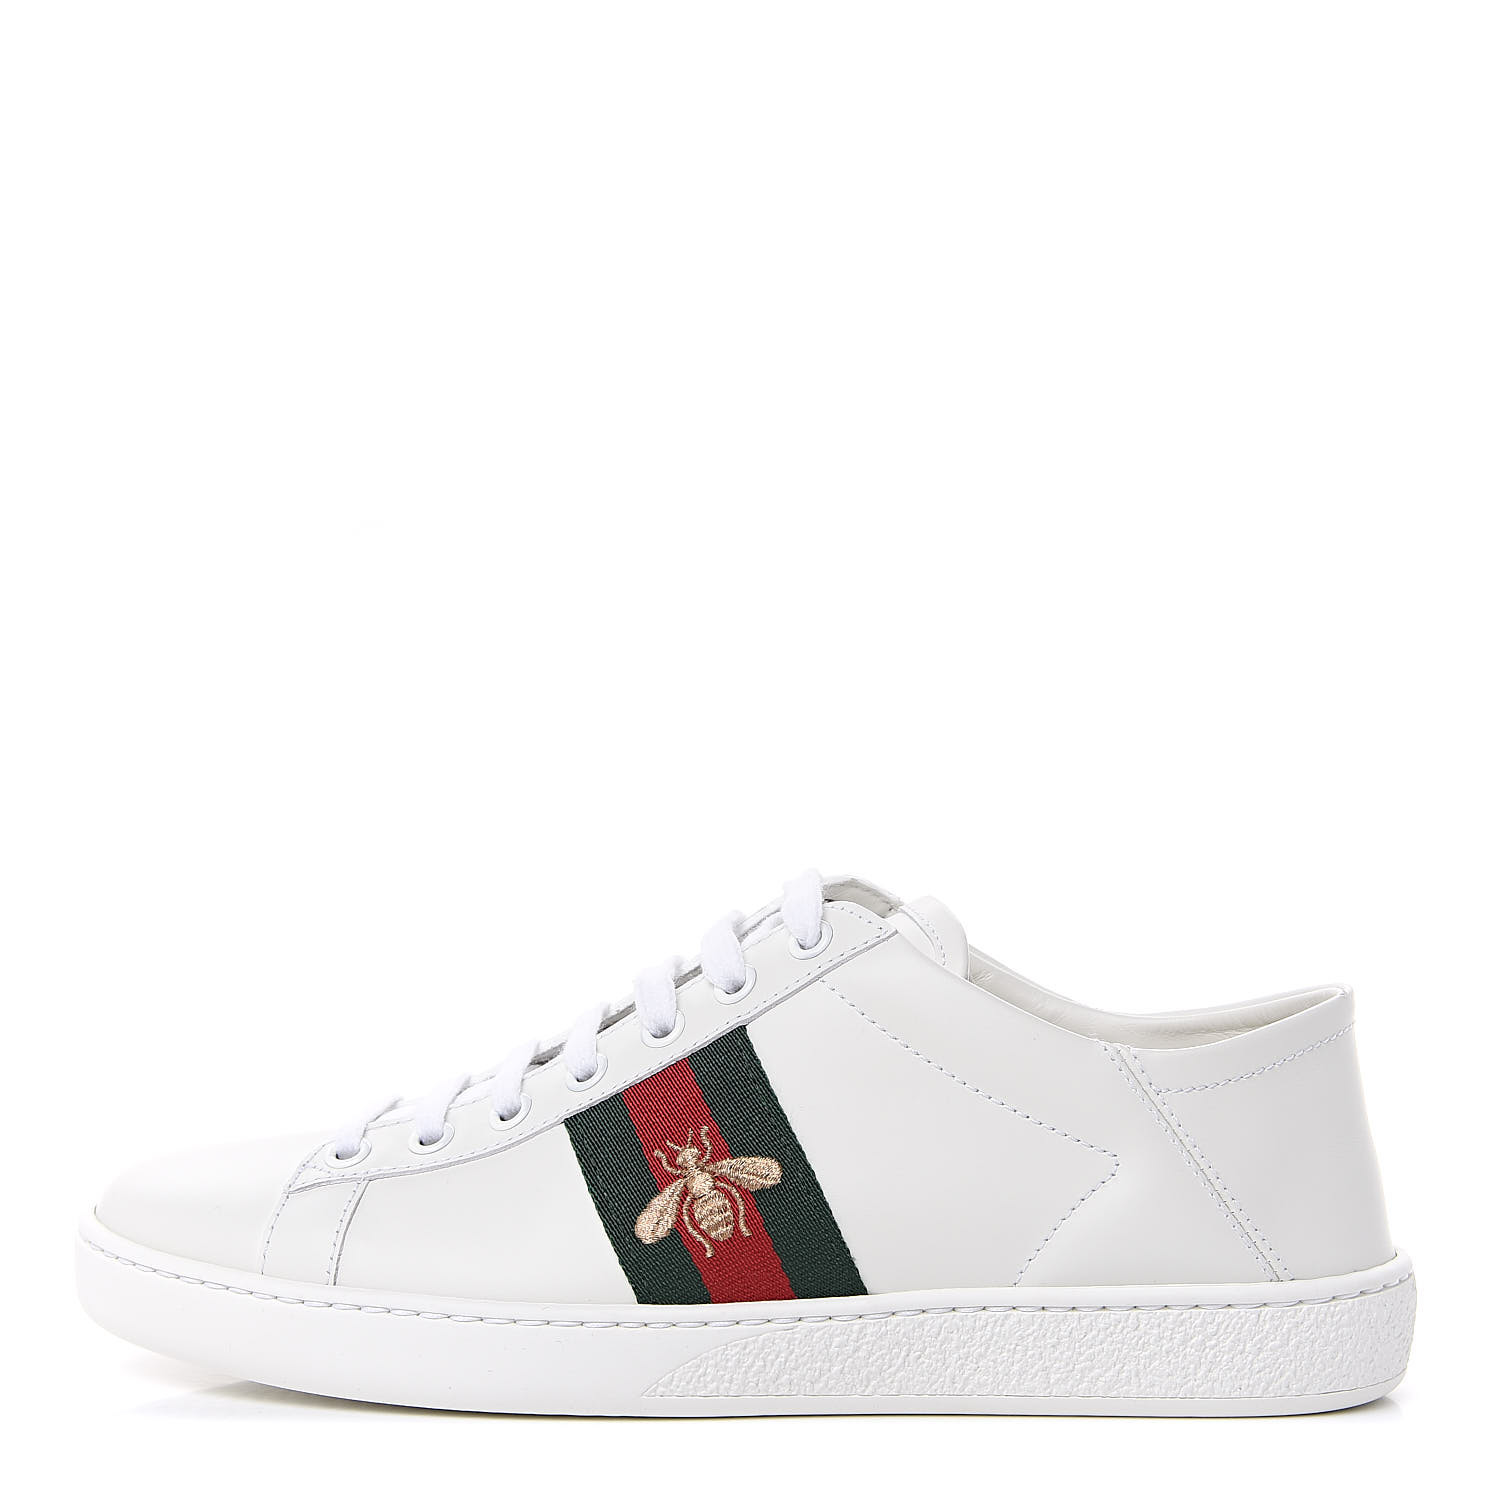 GUCCI Calfskin Embroidered Womens Ace Bee Sneakers 38 White Green 487548